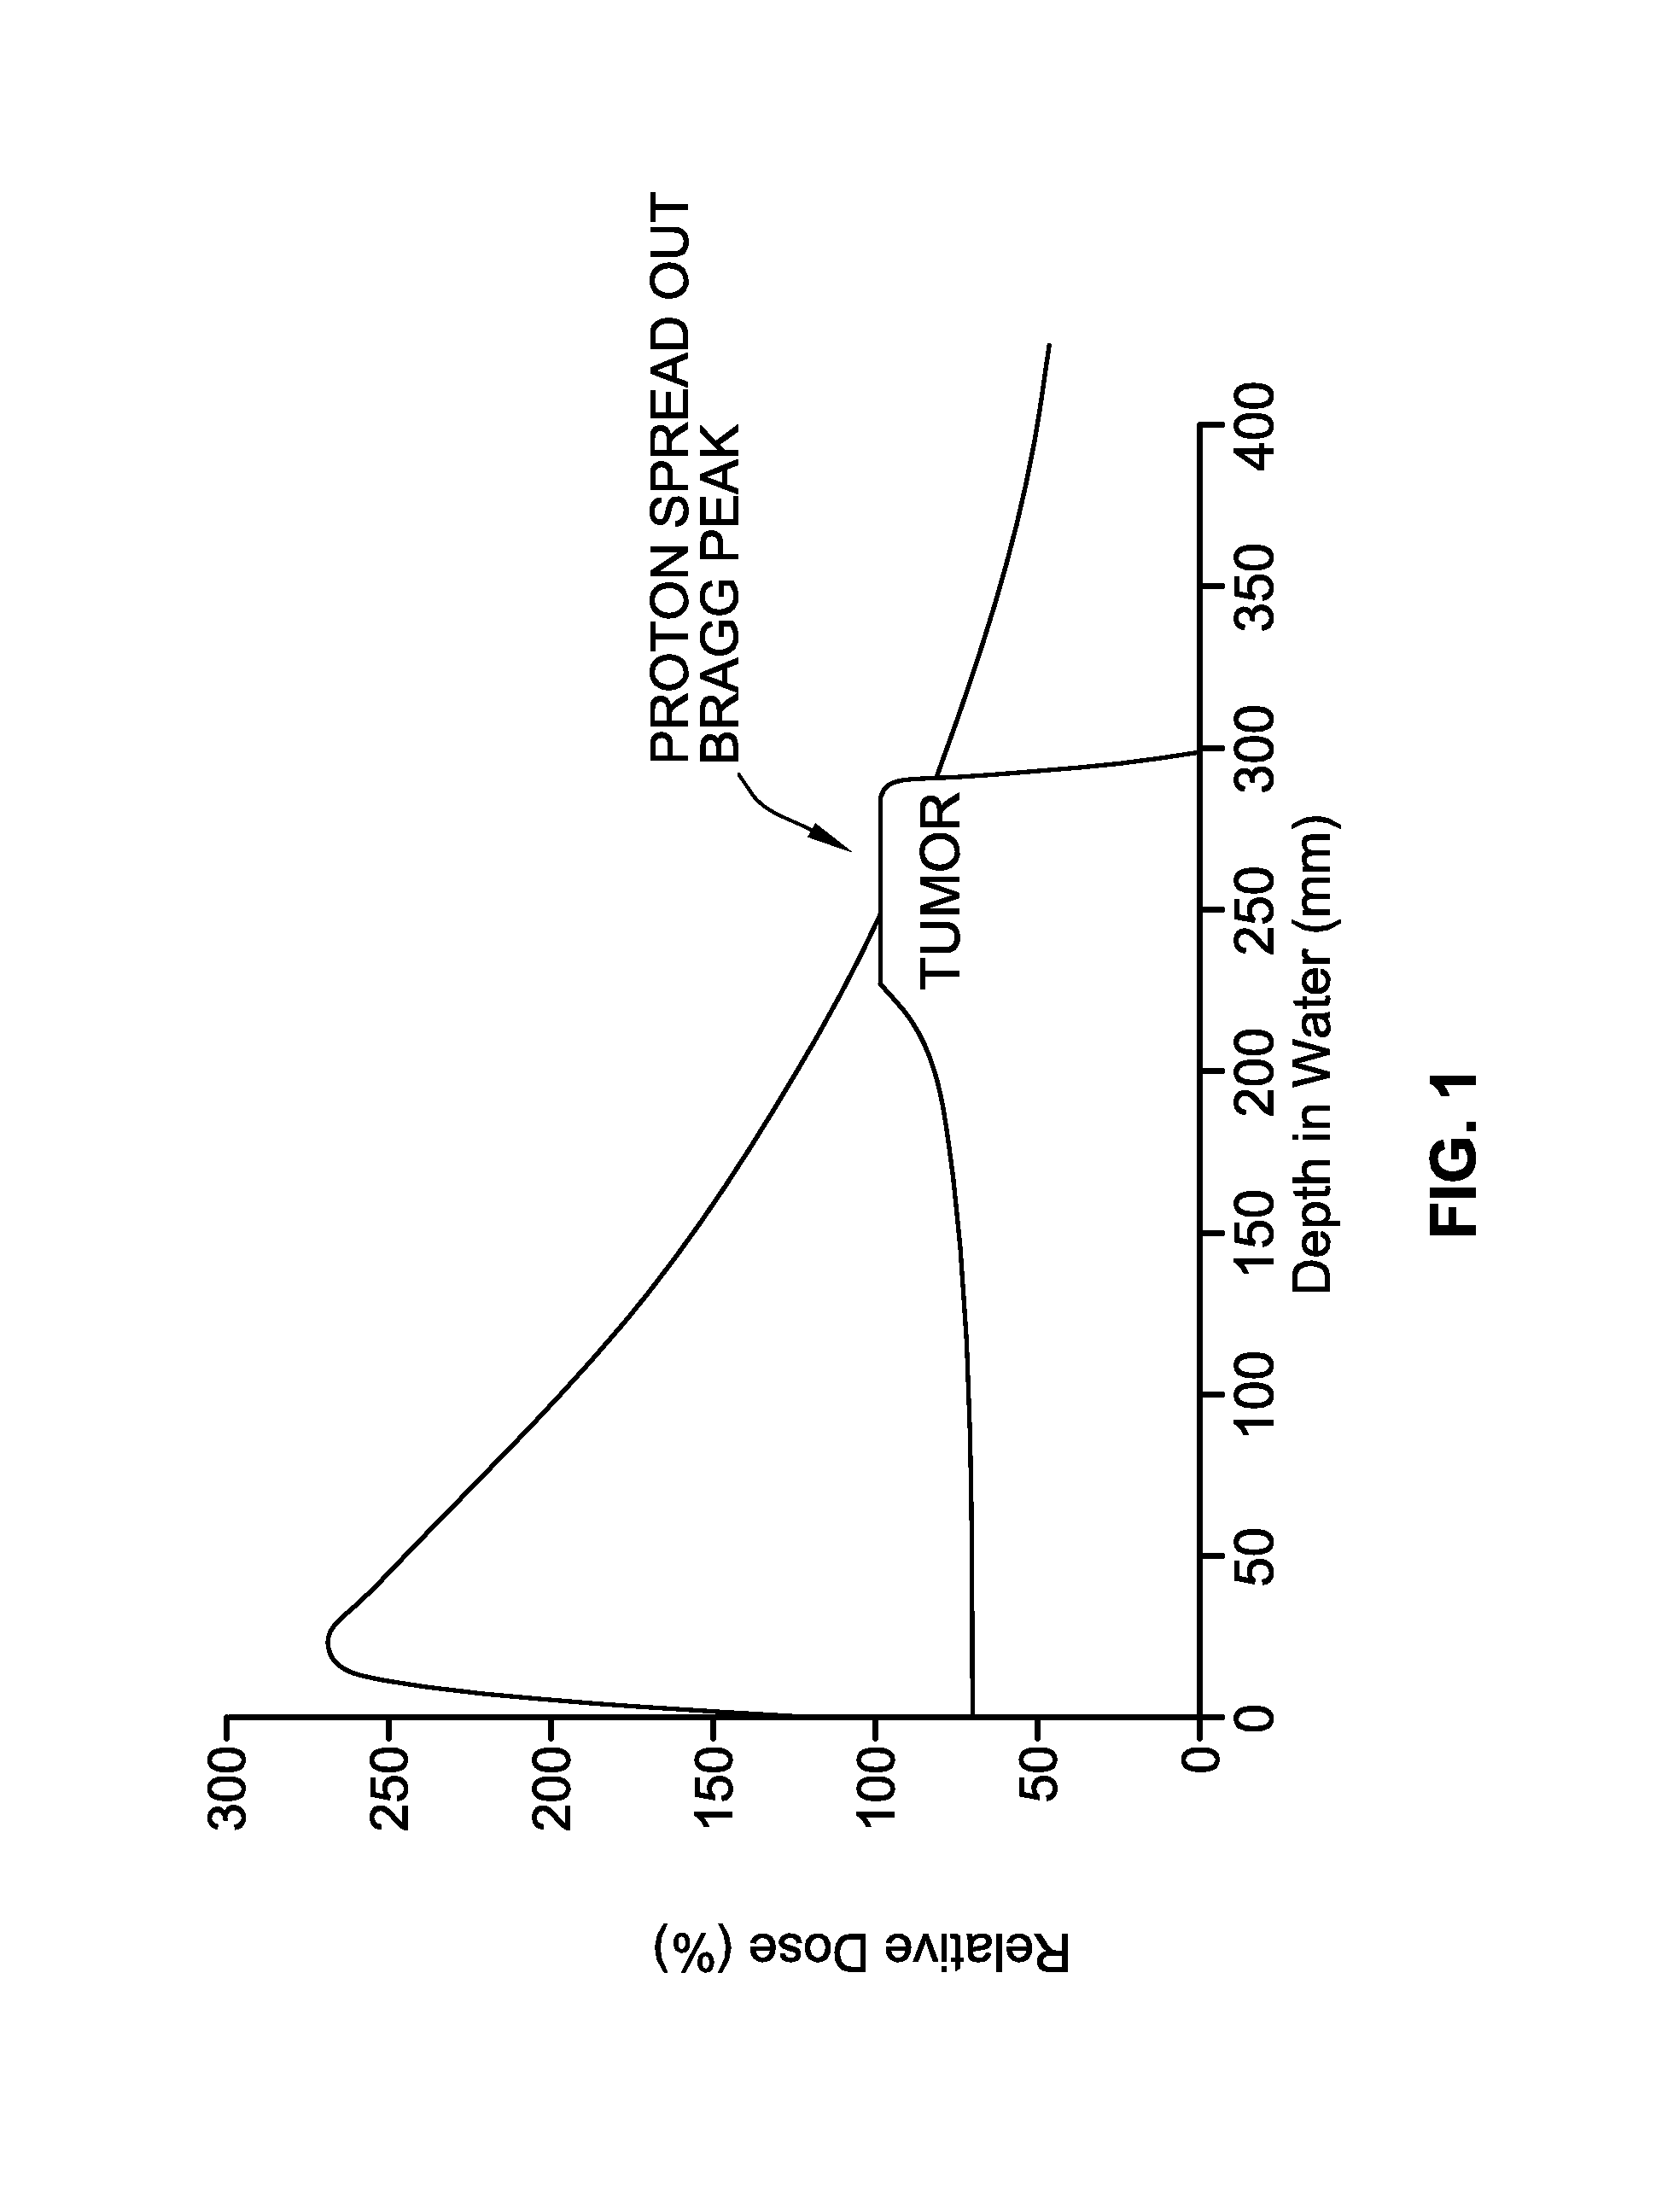 Permanent Magnet Beam Transport System for Proton Radiation Therapy